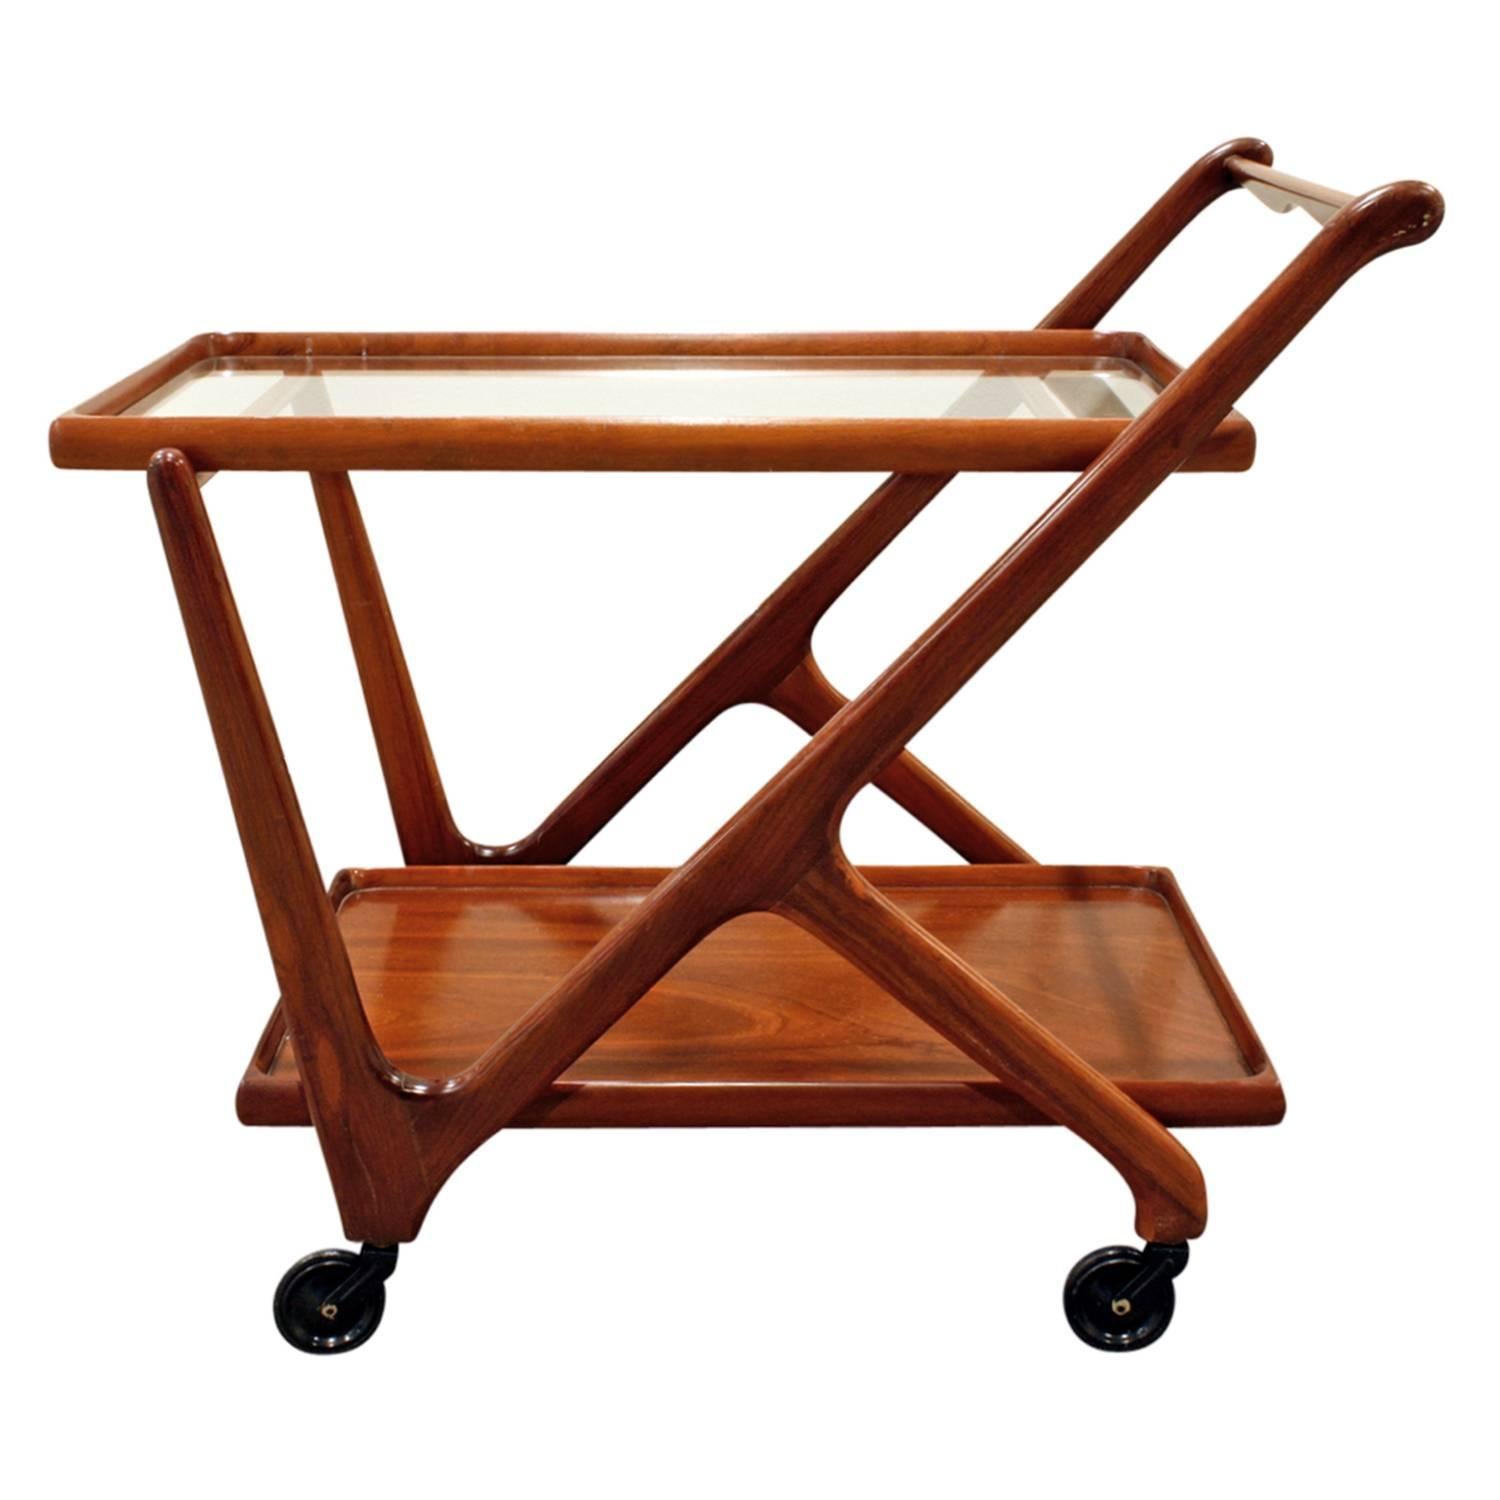 Rolling serving cart in lacquered mahogany with glass by Cesare Lacca (Italy) for Cassina, American, 1970s.  This cart is very stylish and beautifully made.